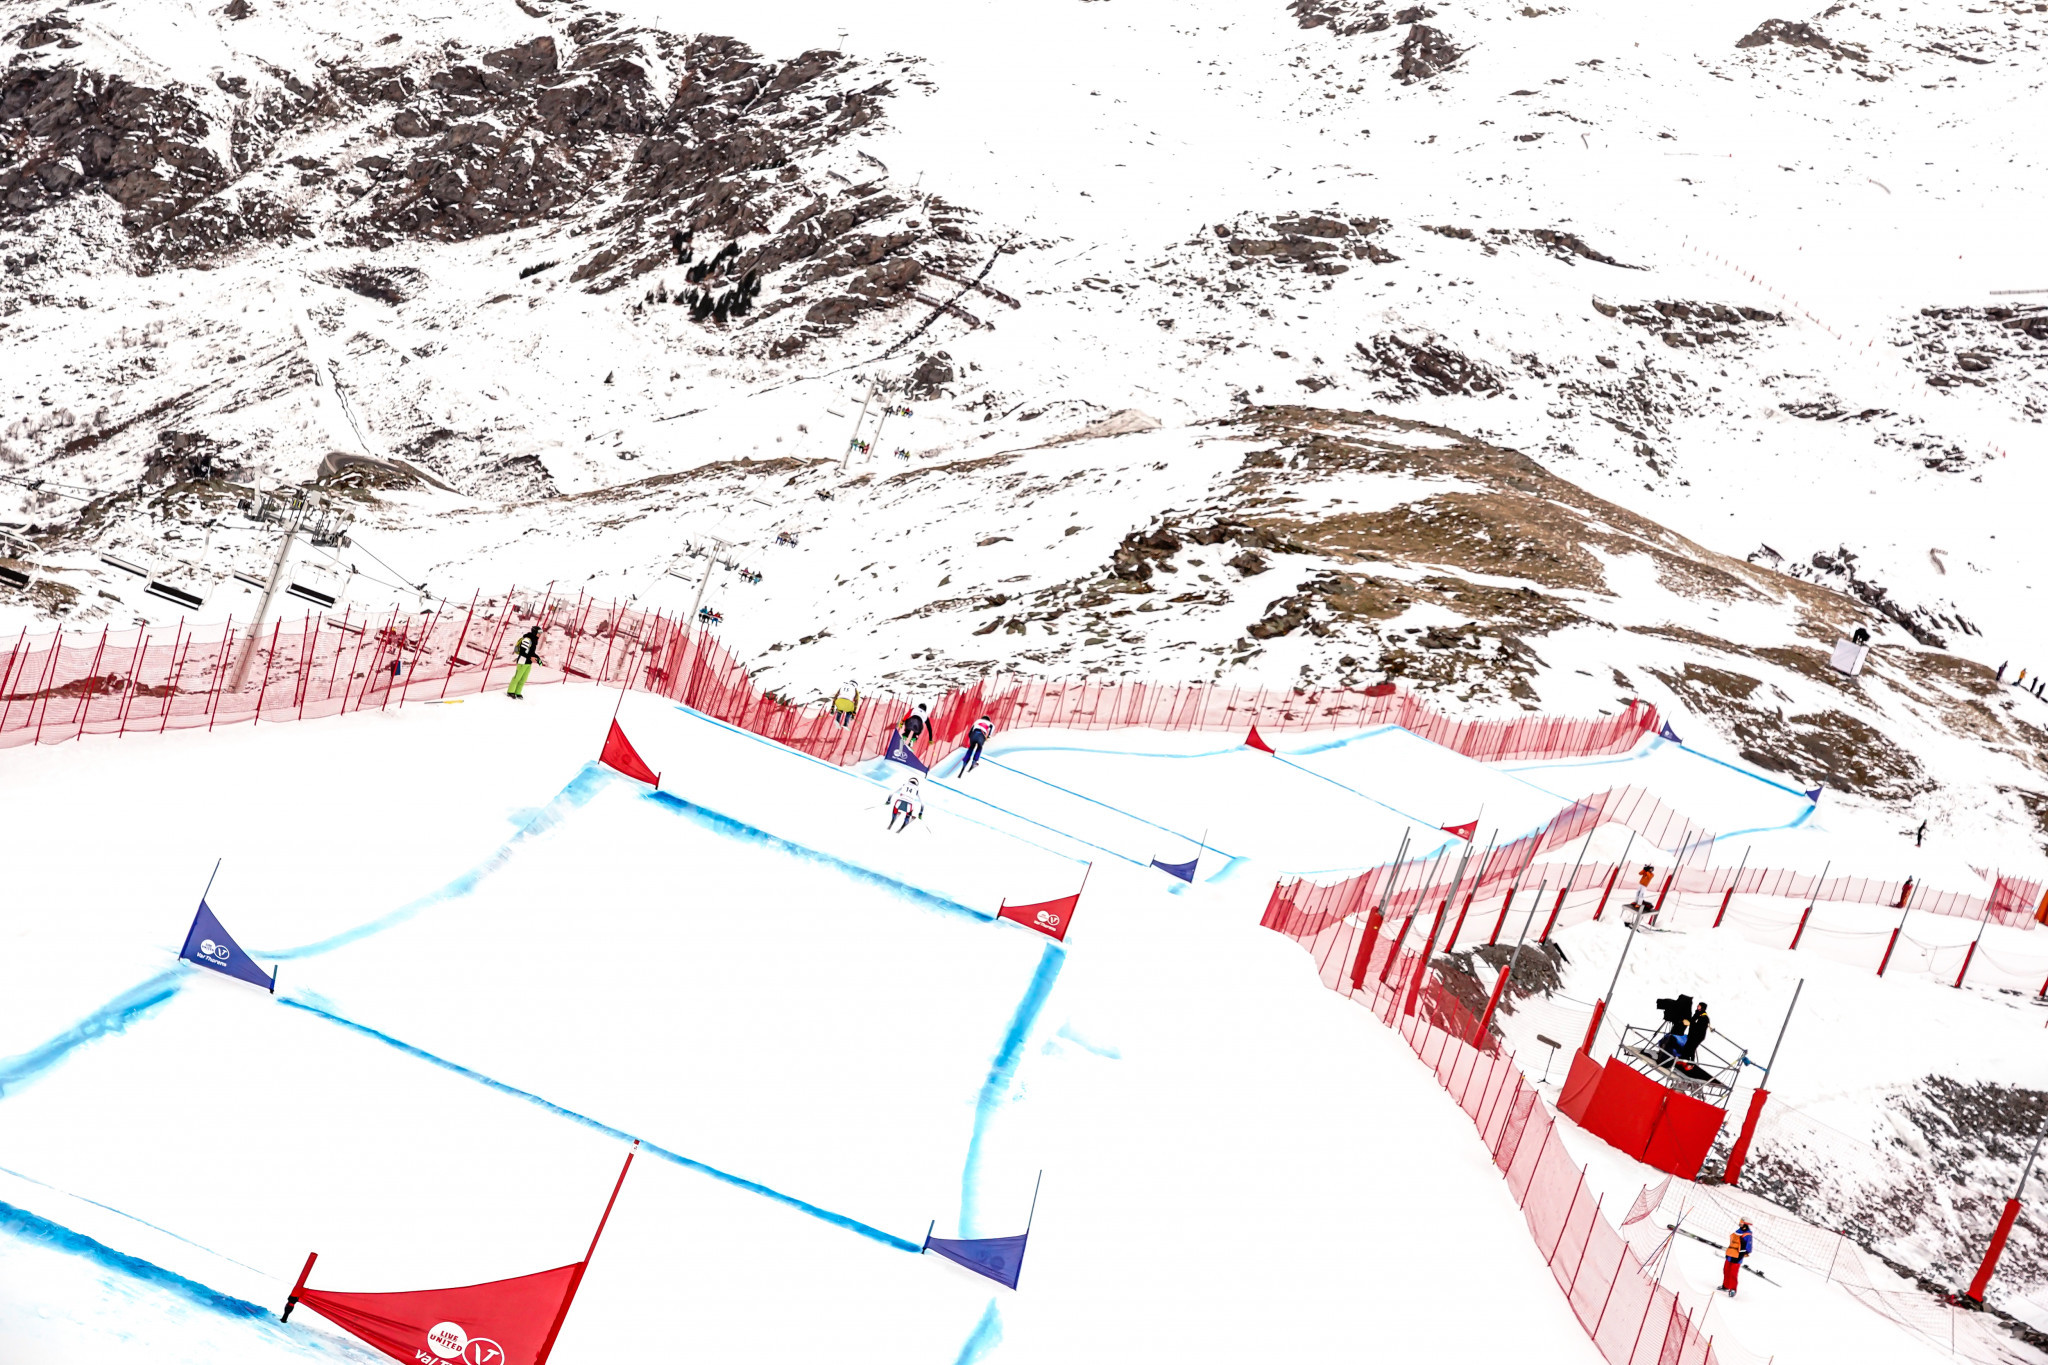 Weather forces cancellation of Ski Cross World Cup qualifying in Val Thorens